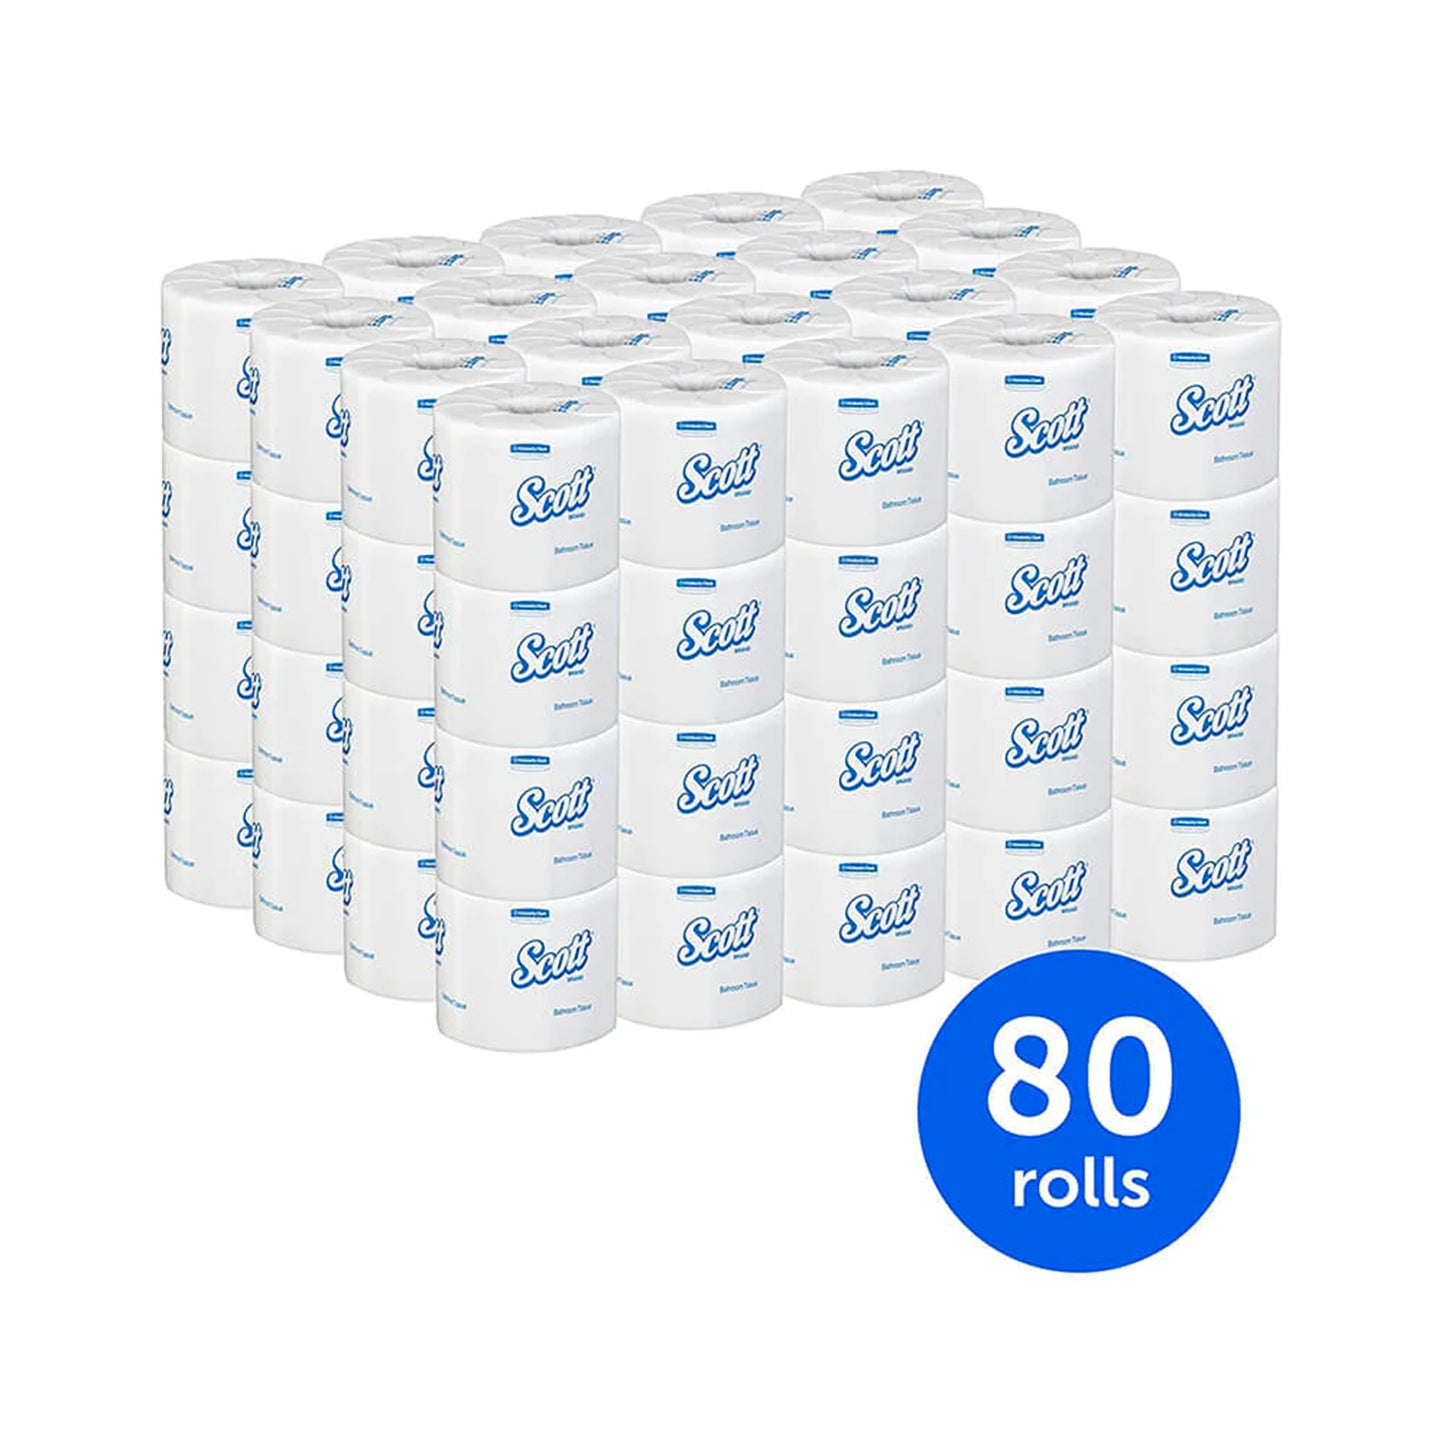 Scott Toilet Paper Tissue, 2 Ply, 100% Recycled - 80 Rolls